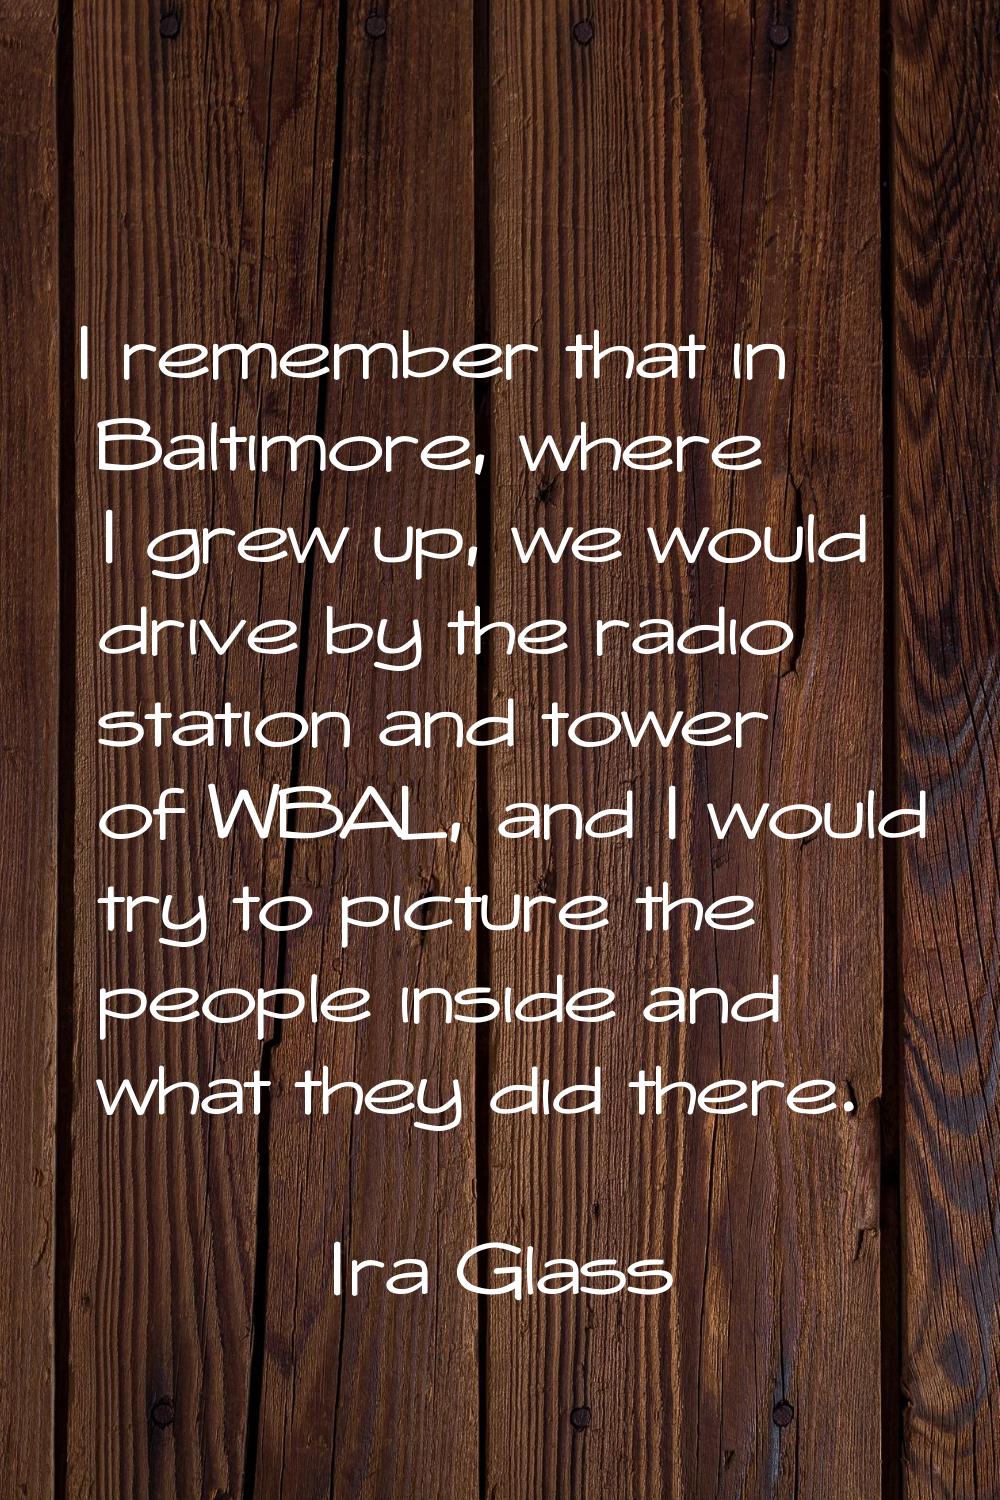 I remember that in Baltimore, where I grew up, we would drive by the radio station and tower of WBA